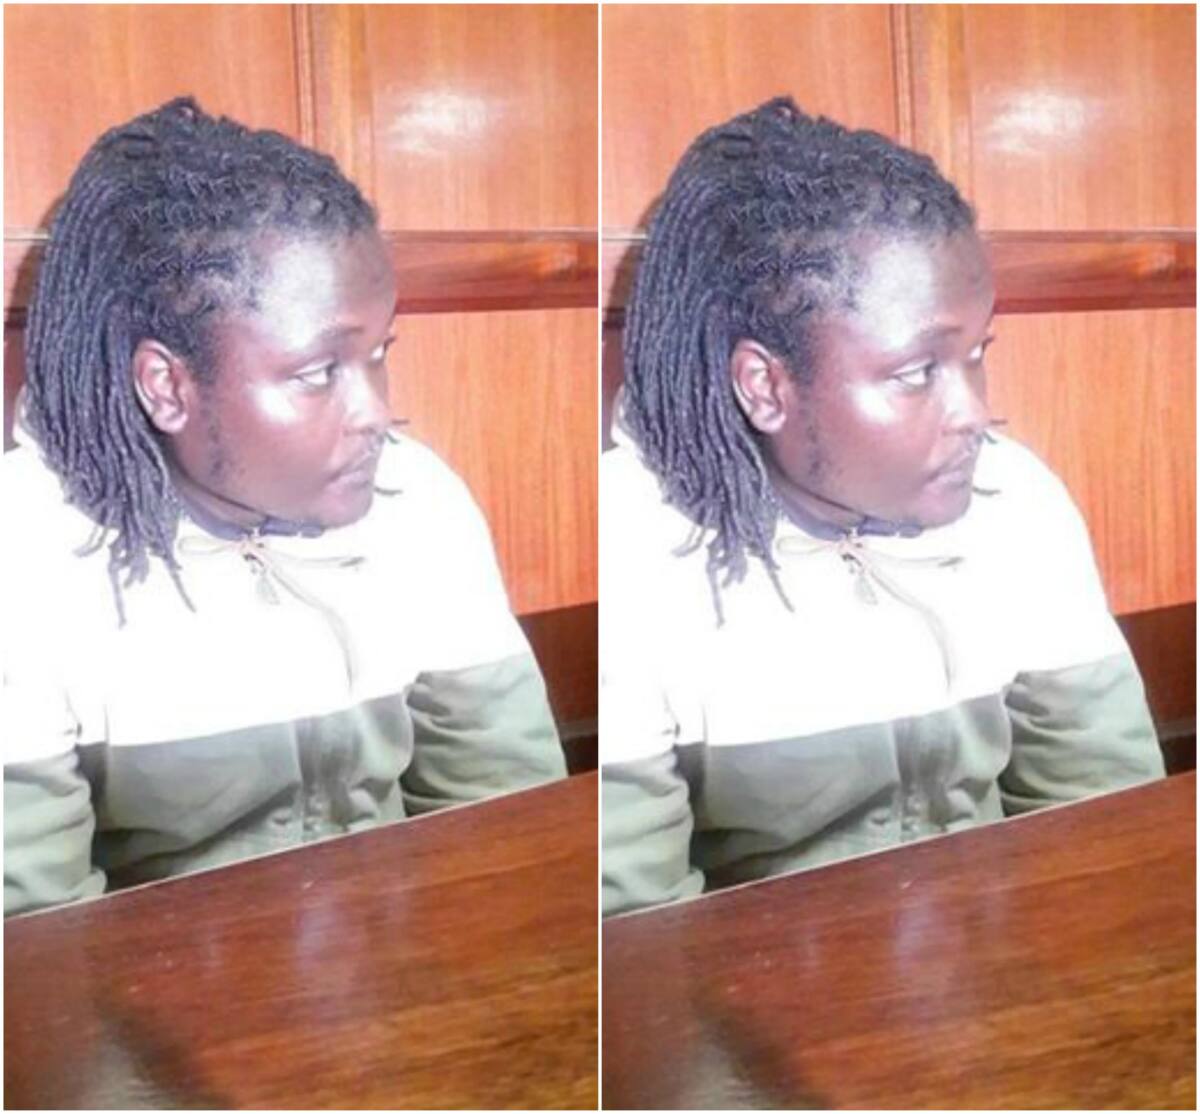 Nairobi barber in court for using his manhood to sexually assault a police officer